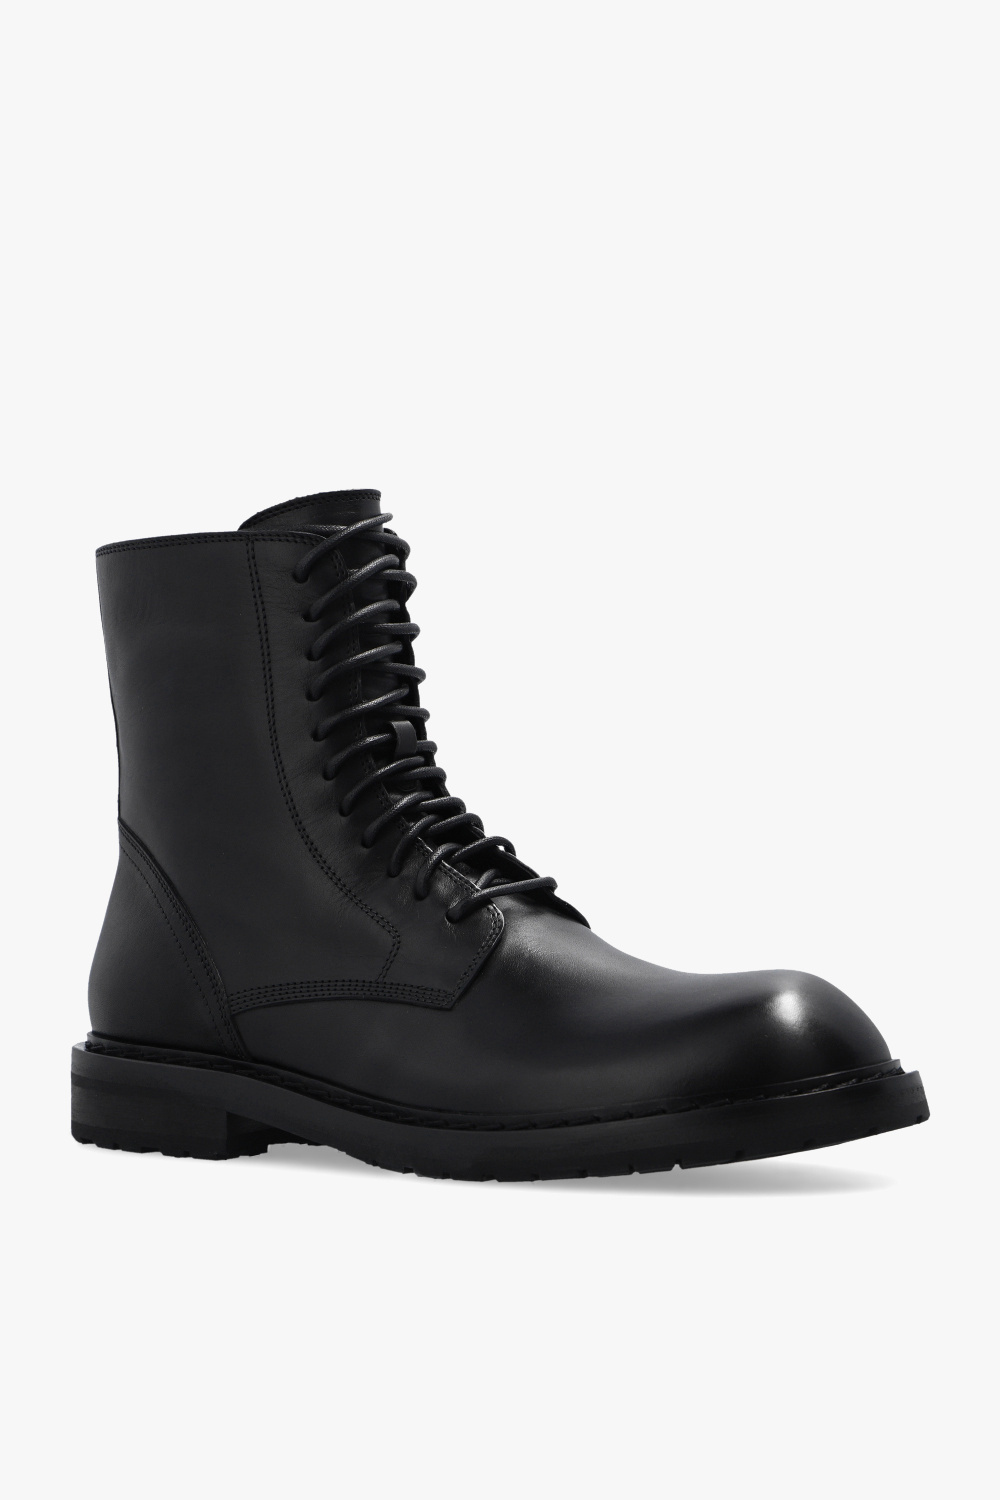 Ann Demeulemeester ‘Danny’ ankle boots